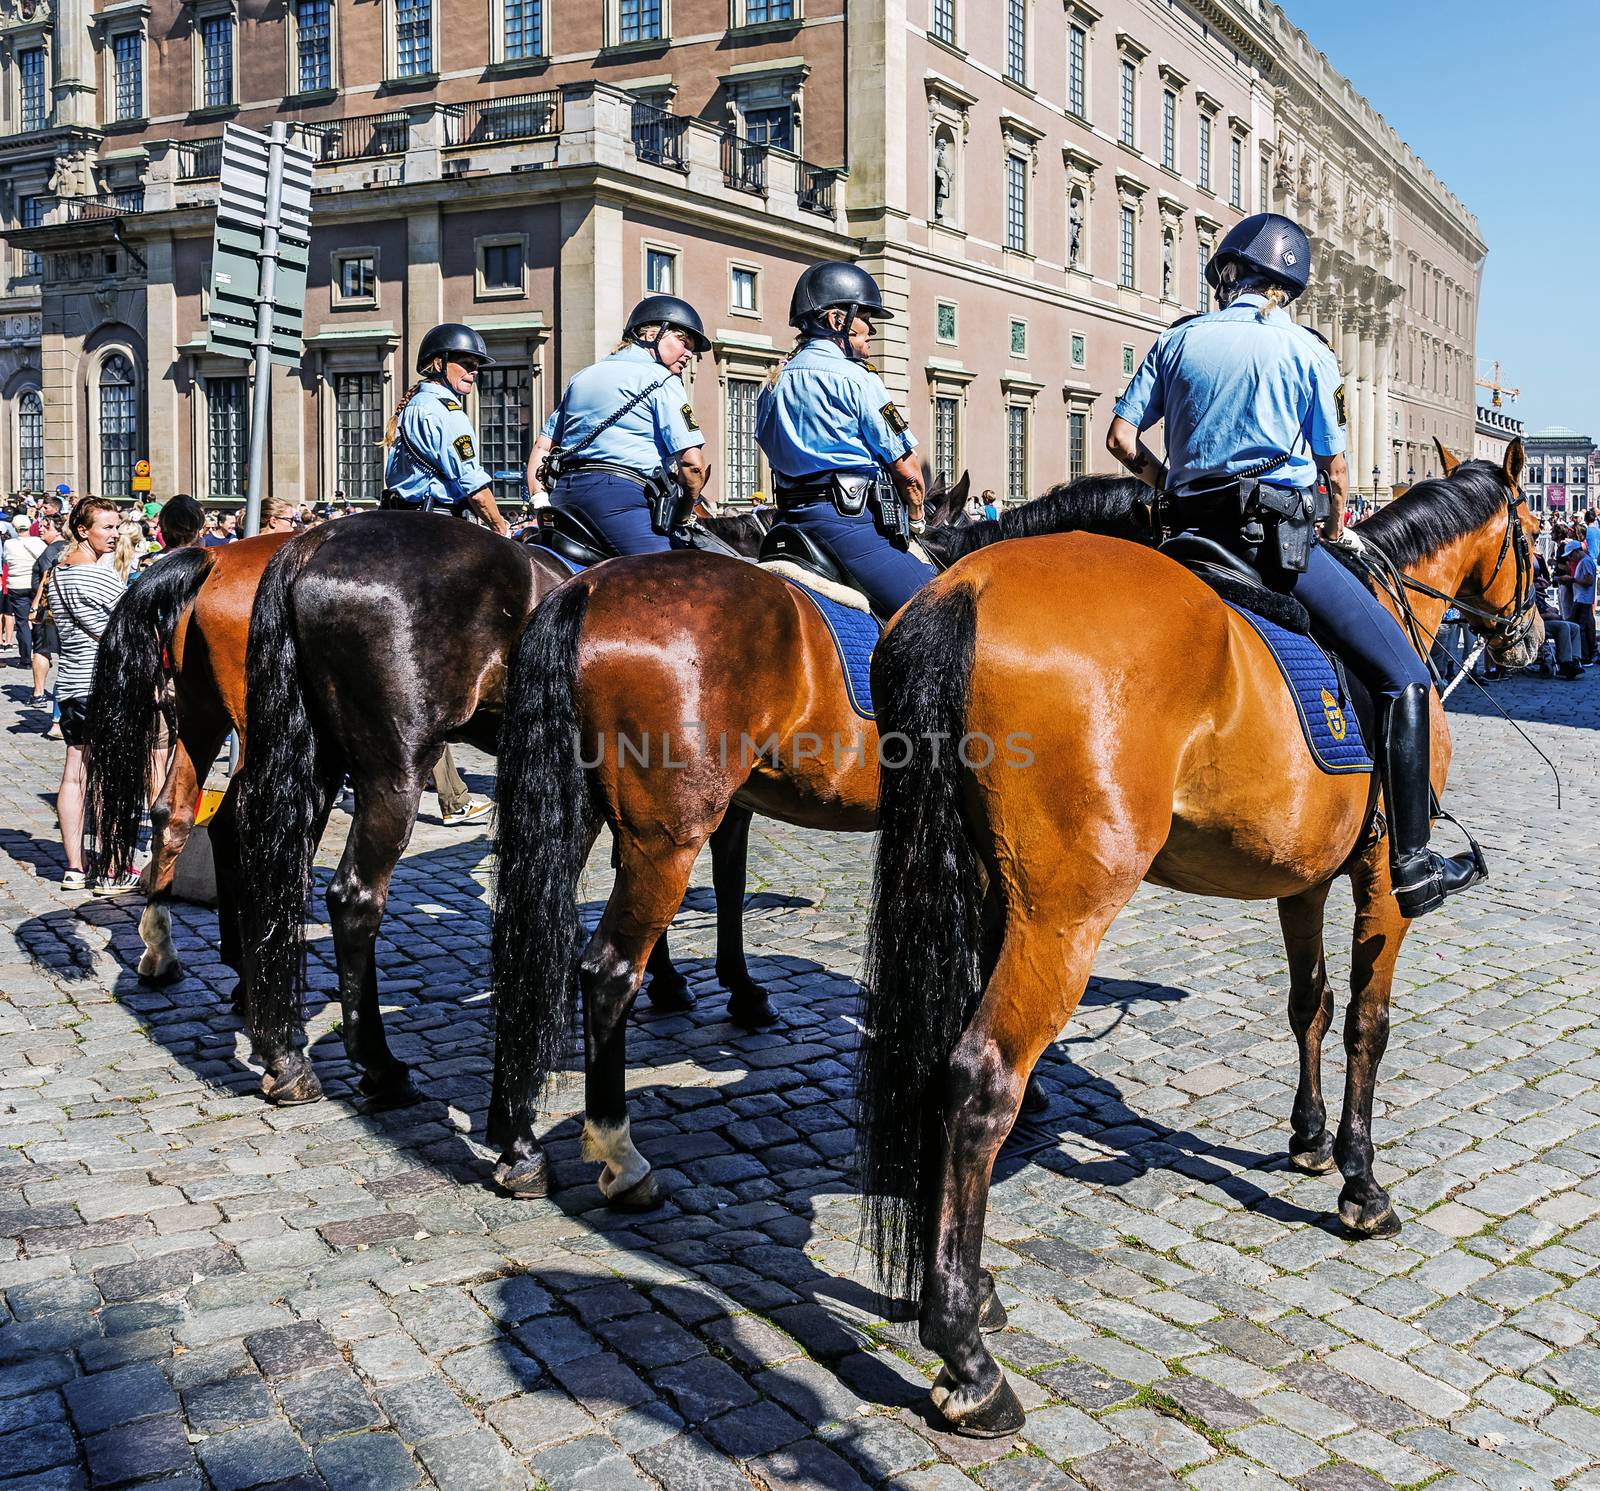 Female mounted patrol secures Changing of the Guard at the Royal Palace in Stockholm. The Royal Guard was established in 1523 and continuously guards the Royal Palace since then.